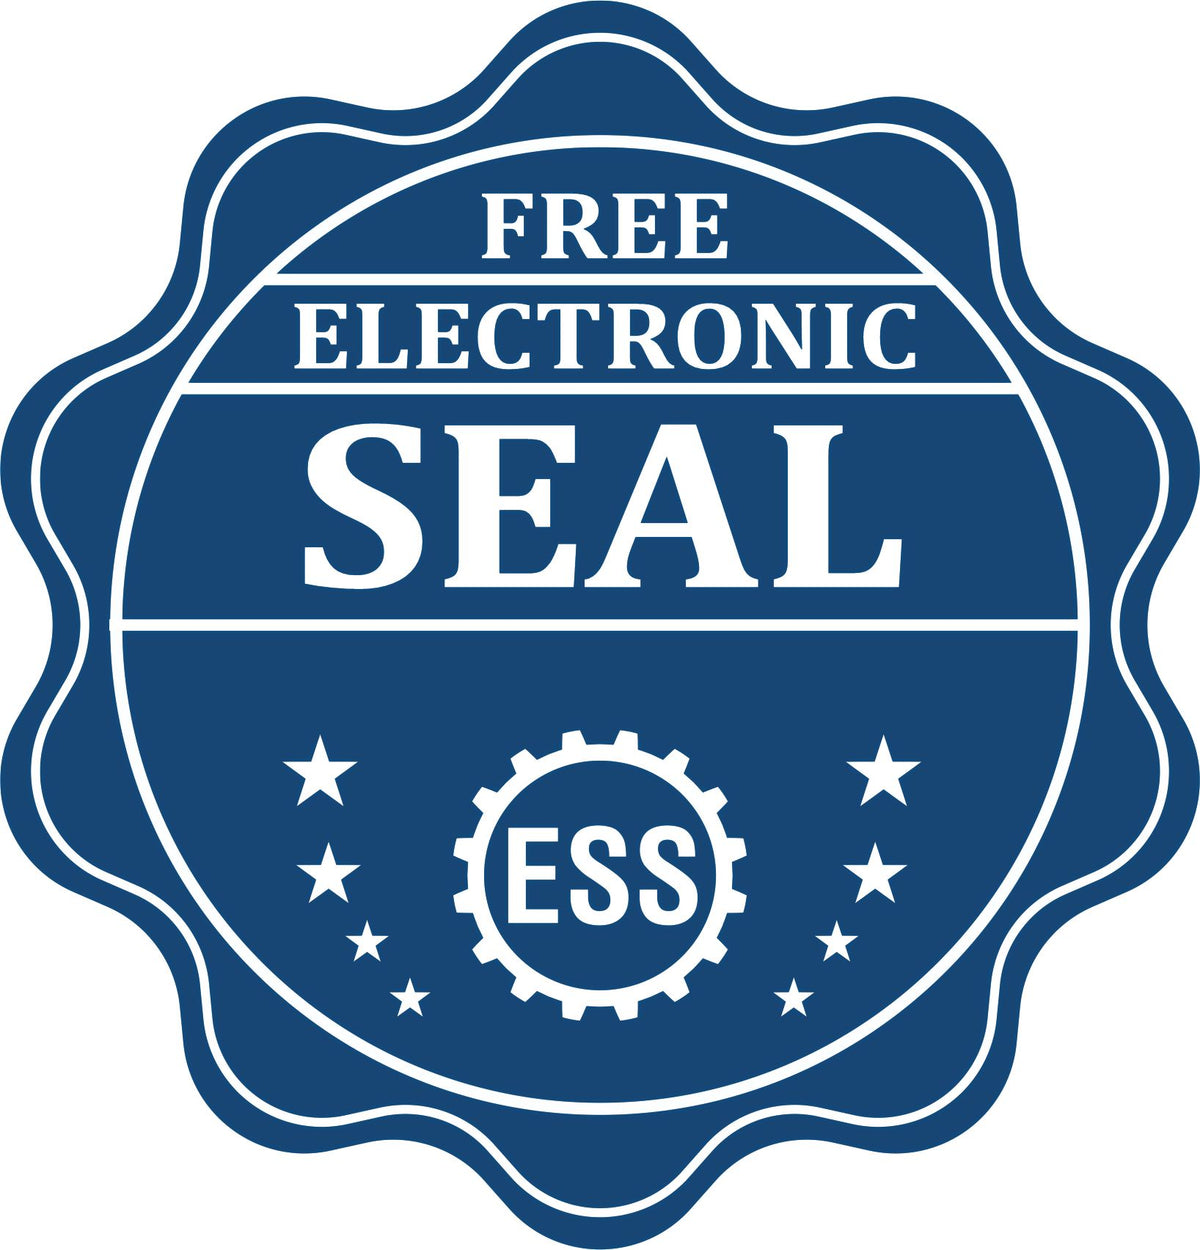 A badge showing a free electronic seal for the Super Slim Pennsylvania Notary Public Stamp with stars and the ESS gear on the emblem.